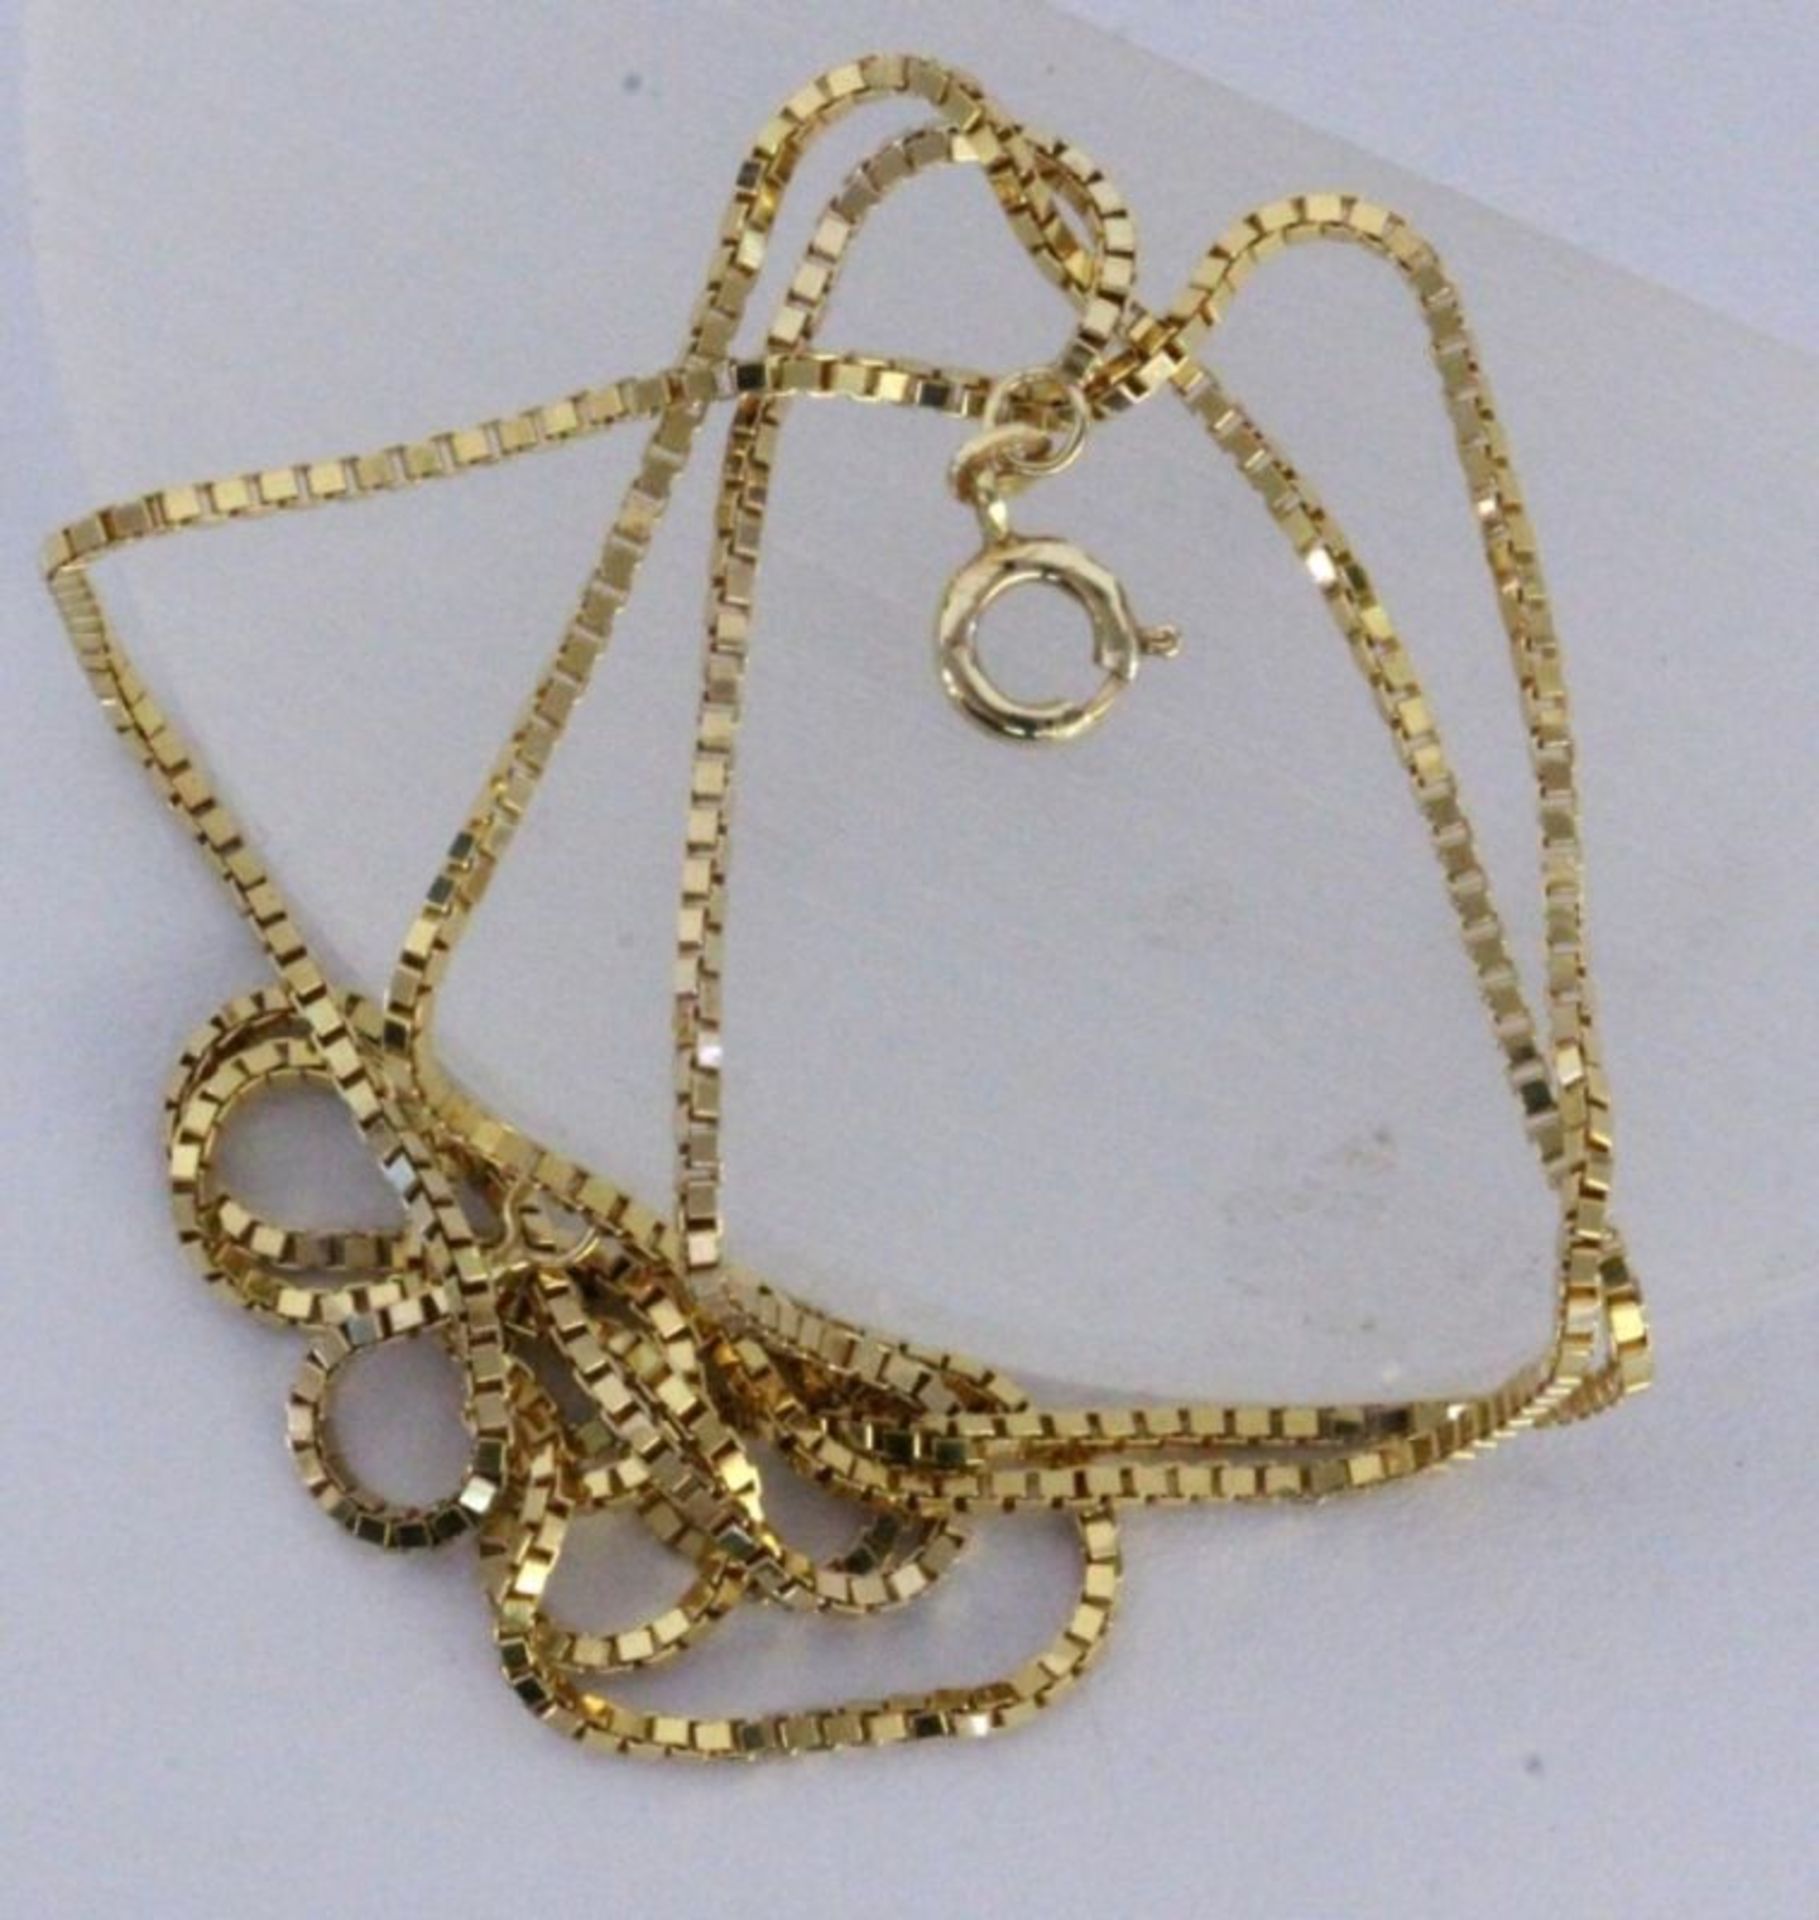 A NECKLACE 585/000 yellow gold. 69 cm long, approx. 9.8 grams. Keywords: jewellery,